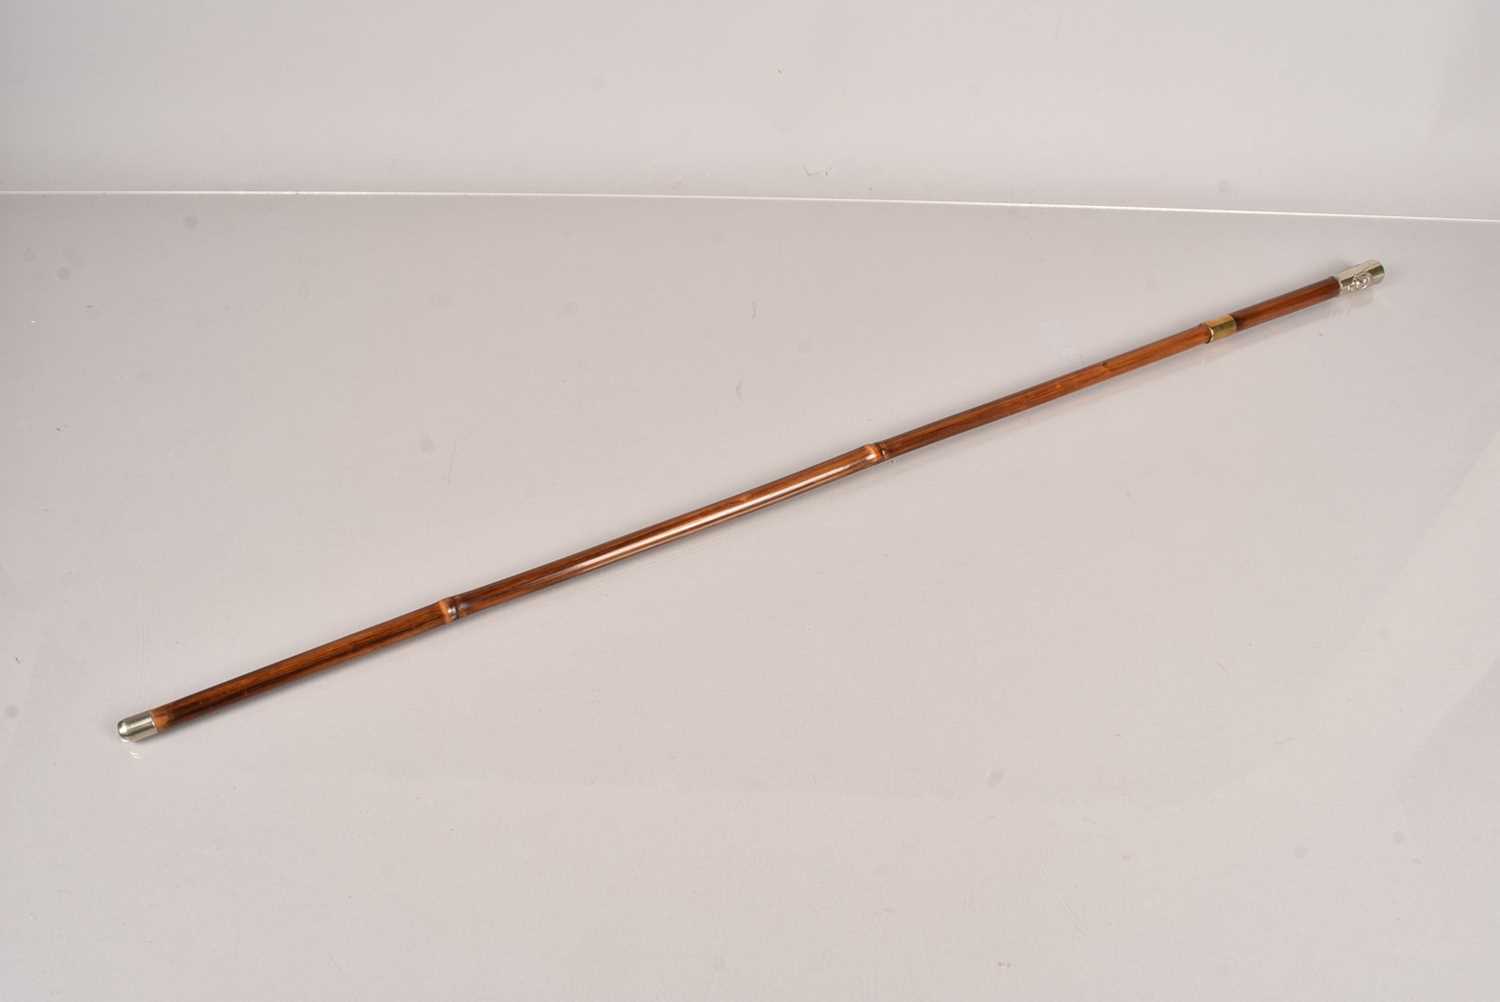 An Honourable Artillery Company (HAC) white metal topped swagger sword stick, - Image 3 of 6